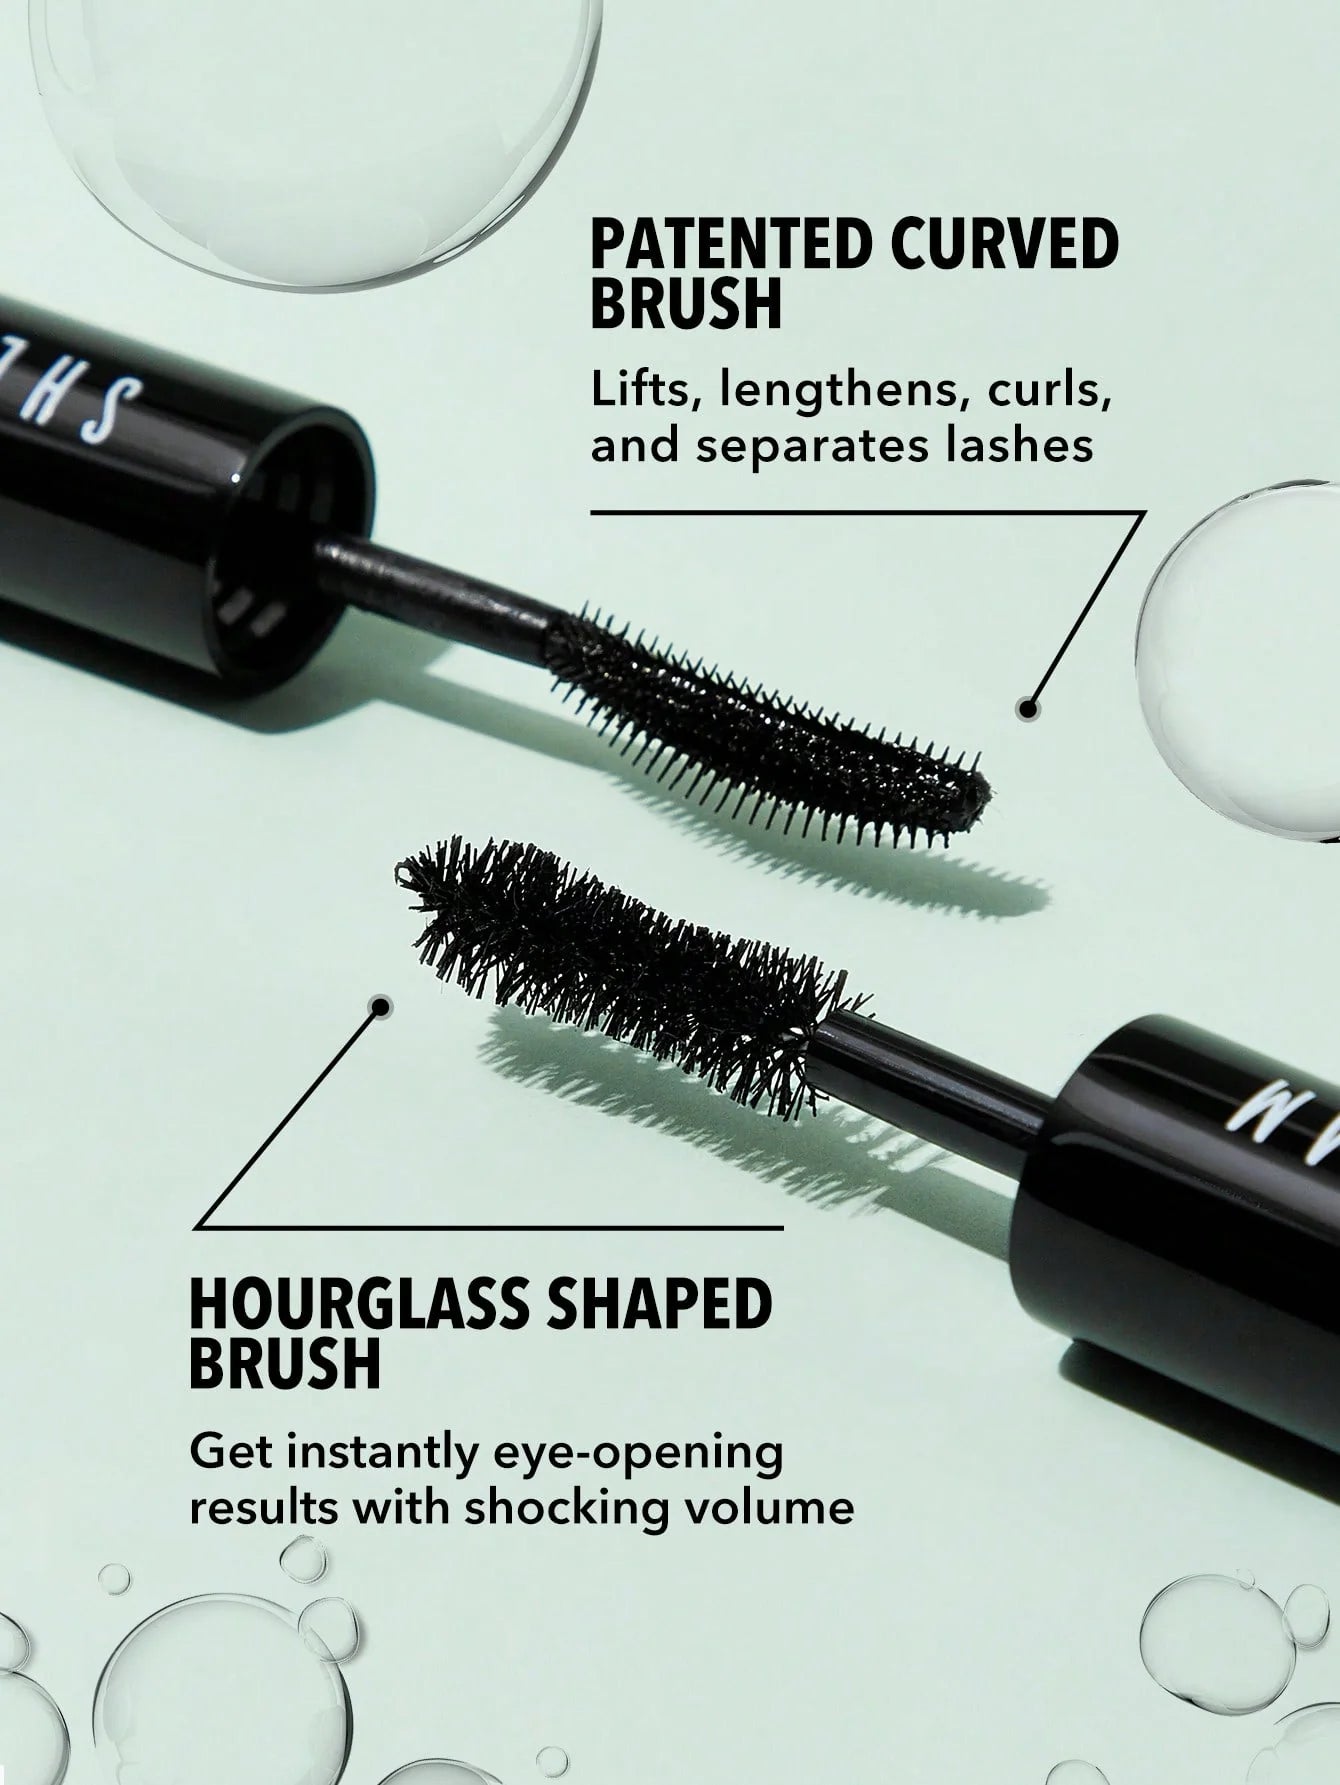 Sheglam All-in-One Volume and Length Mascara